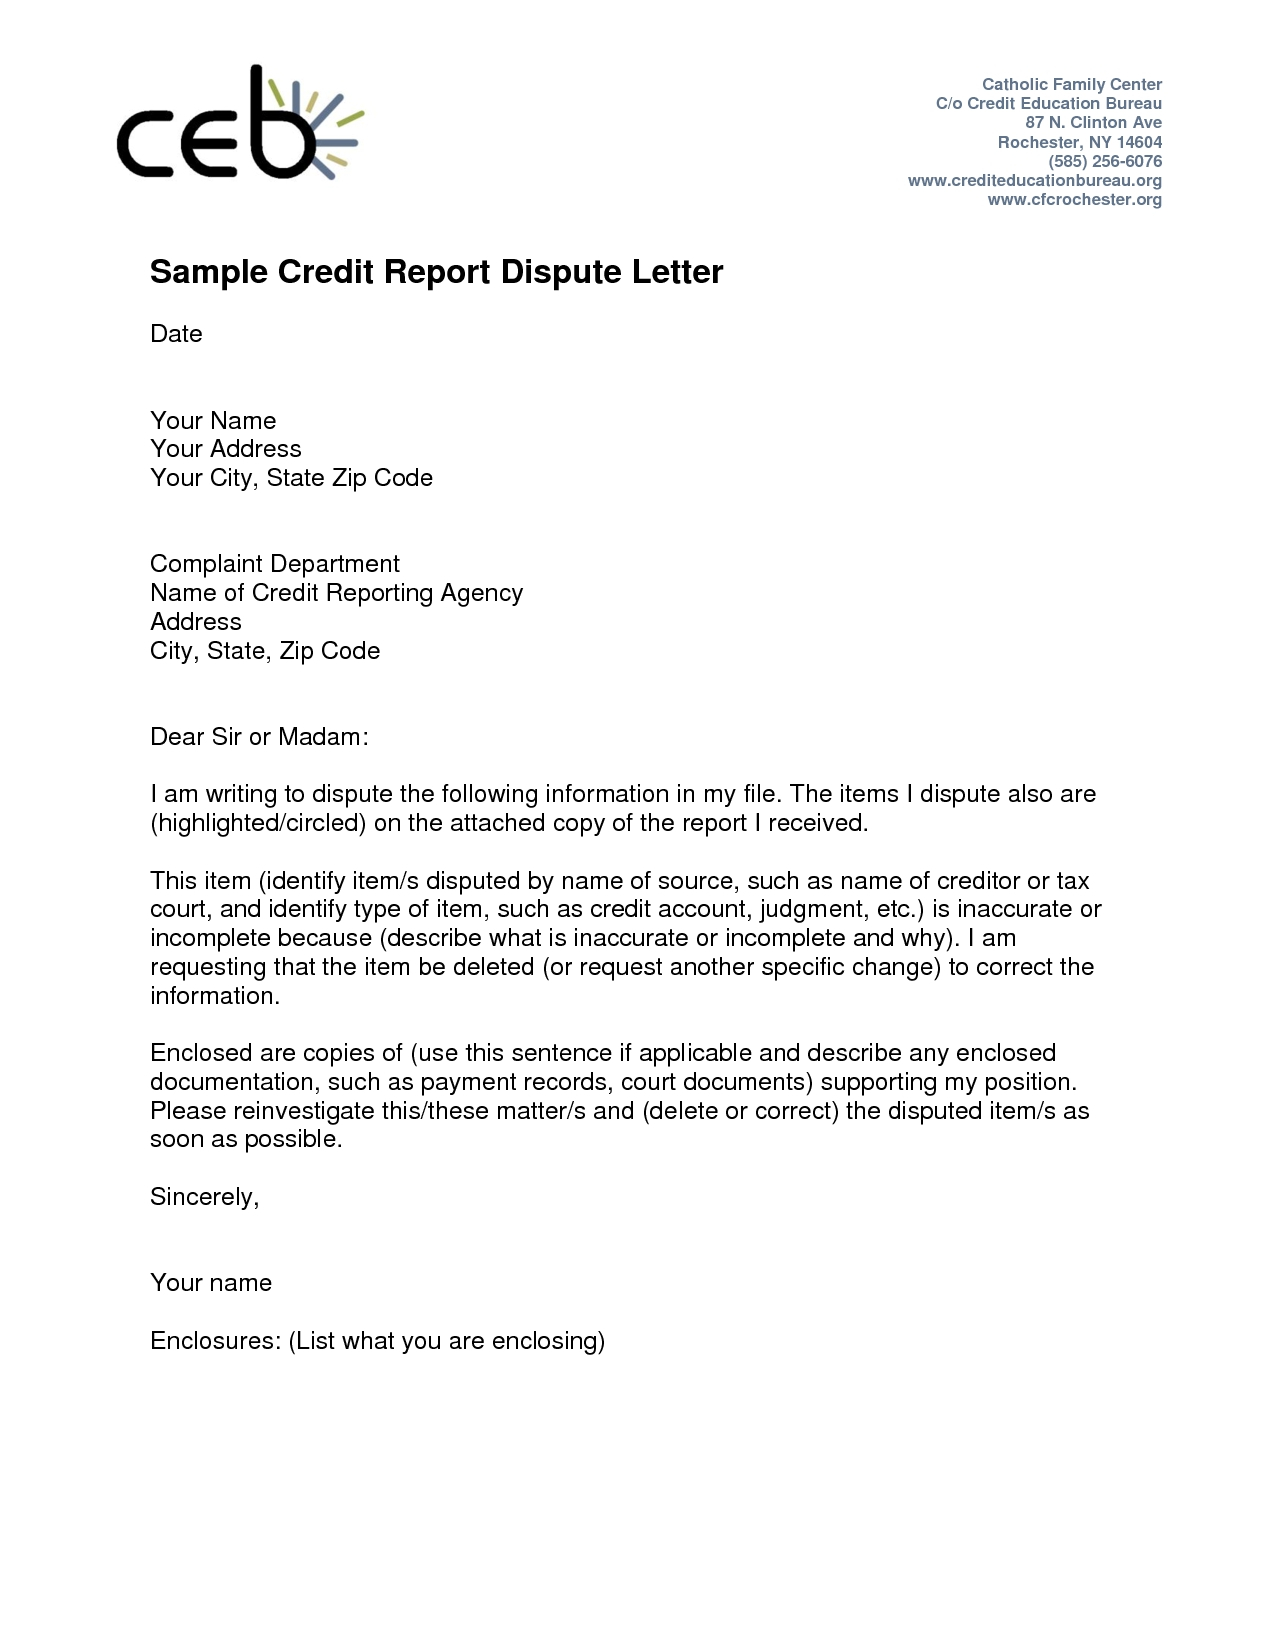 Collection Dispute Letter Template - Credit Dispute Letter Templates Acurnamedia